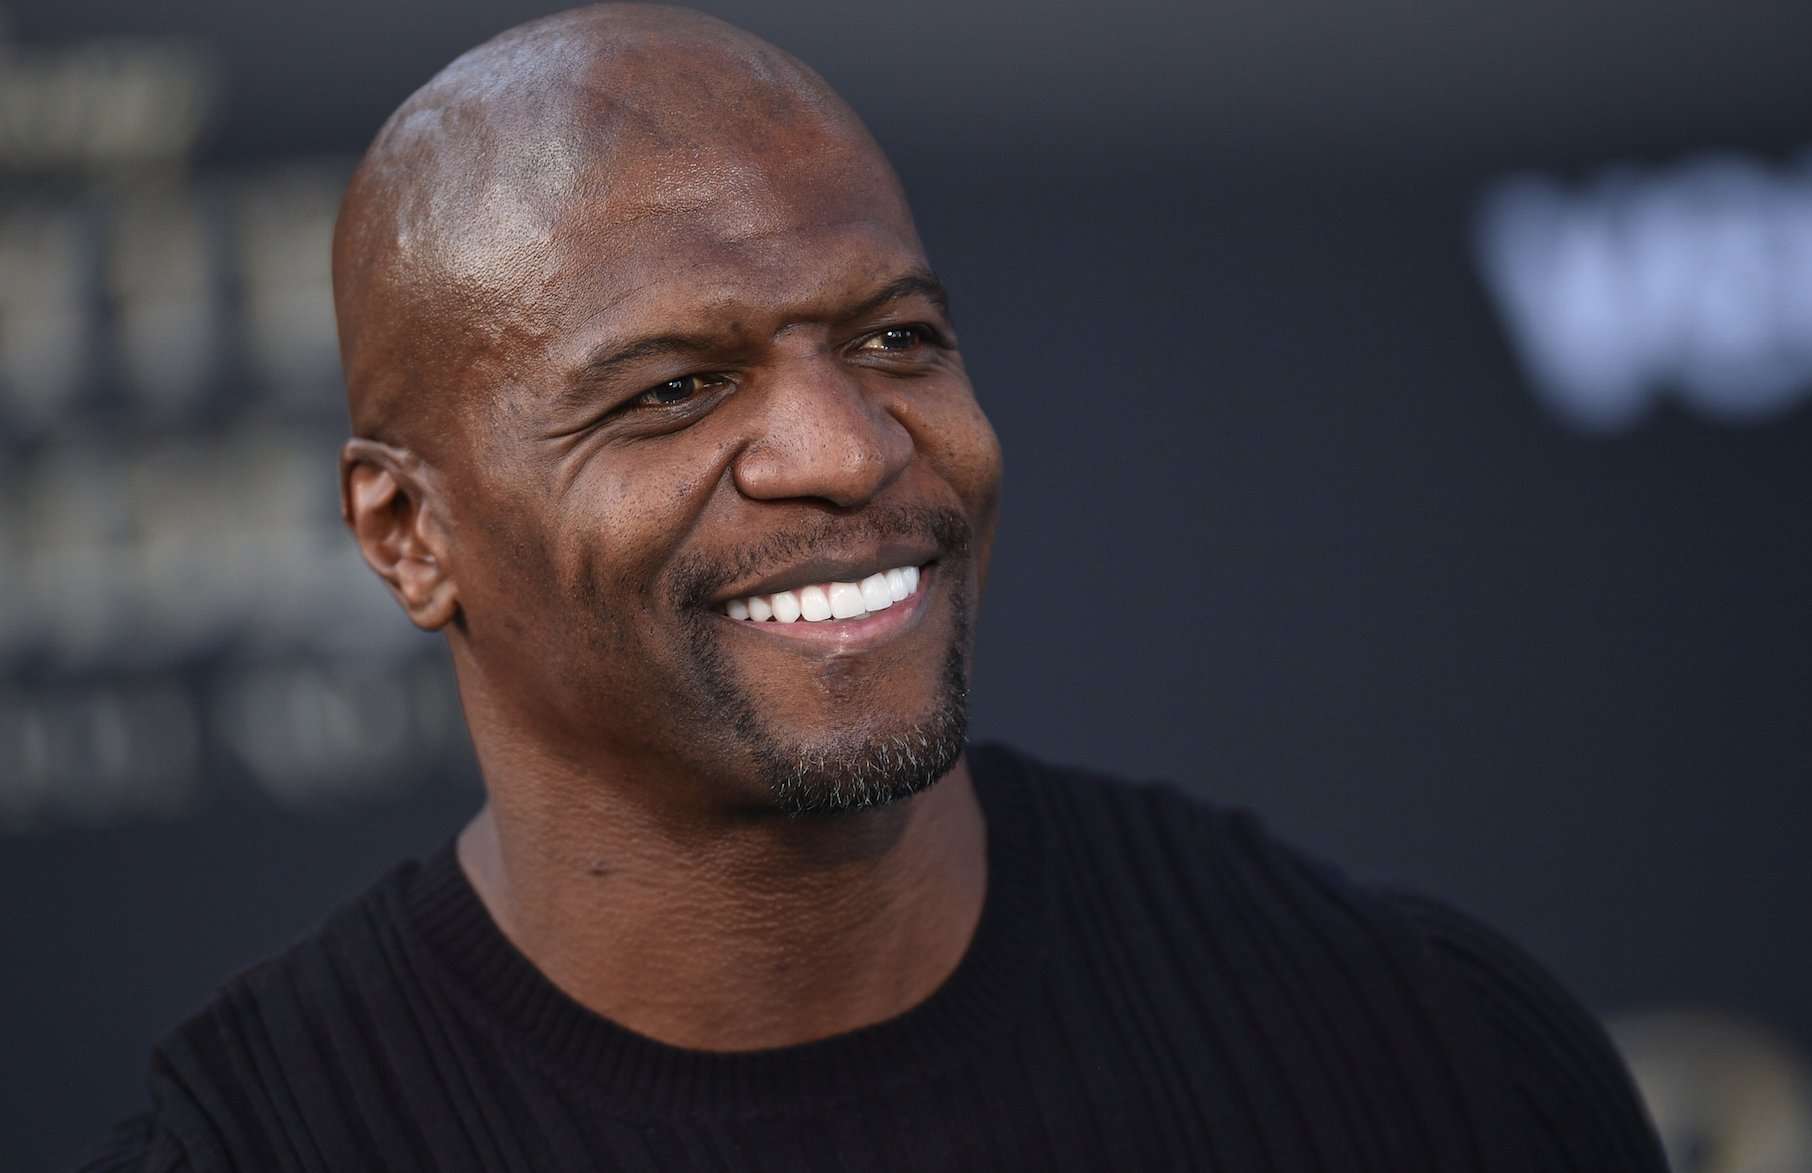 image for Terry Crews Implies He’s Being Pressured to Drop His Sexual Assault Lawsuit if He Wants to Avoid Problems on ‘The Expendables 4’